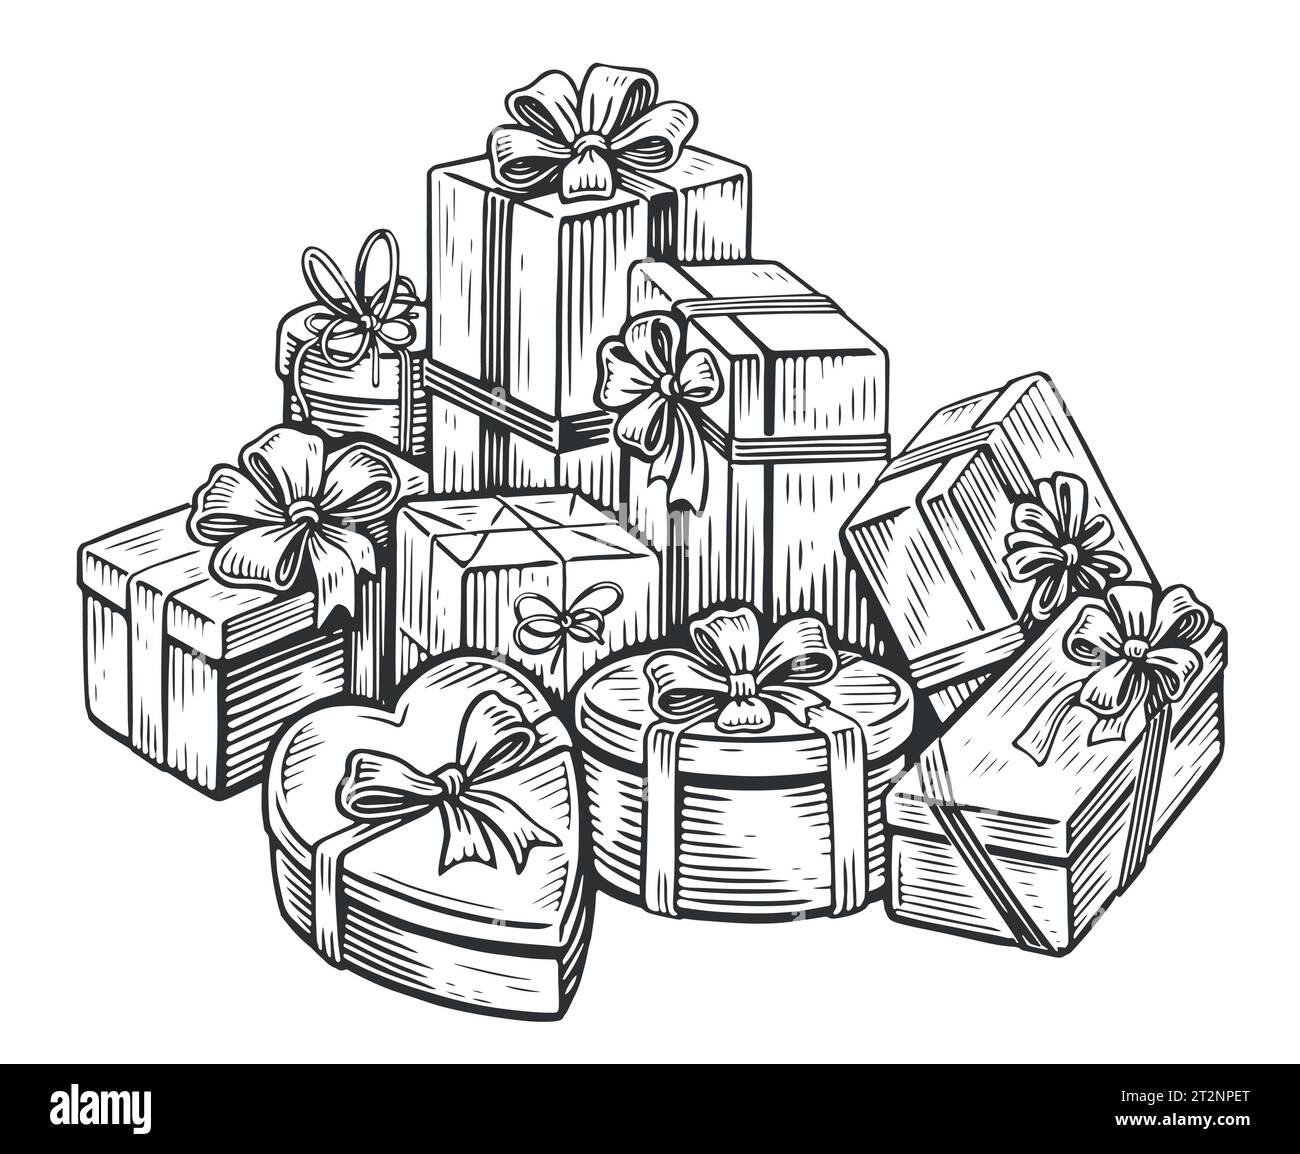 https://c8.alamy.com/comp/2T2NPET/big-pile-of-gift-boxes-in-festive-wrapping-paper-with-ribbon-and-bows-holiday-and-christmas-gifts-sketch-vector-2T2NPET.jpg